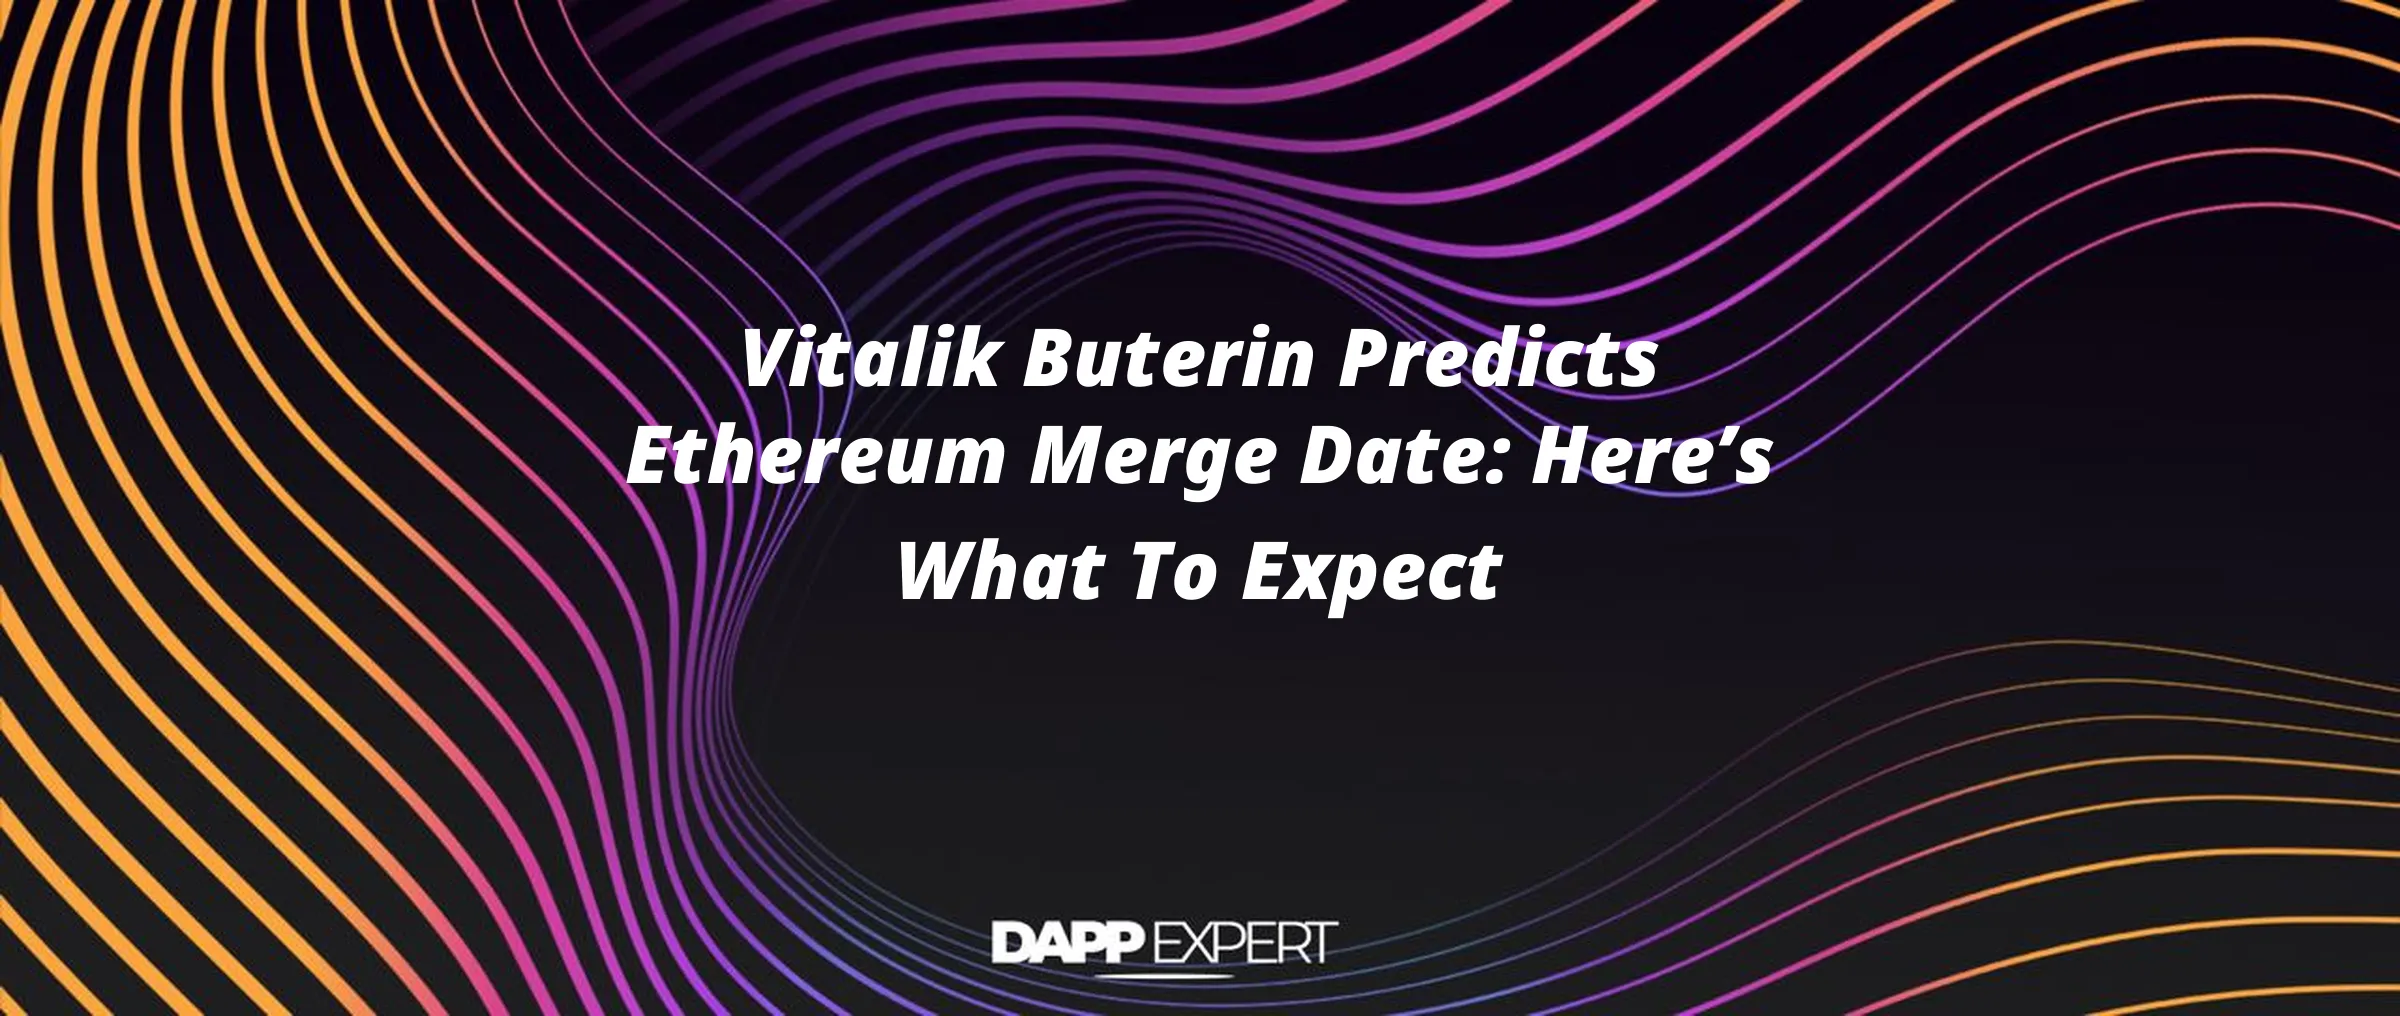 Vitalik Buterin Predicts Ethereum Merge Date: Here’s What To Expect